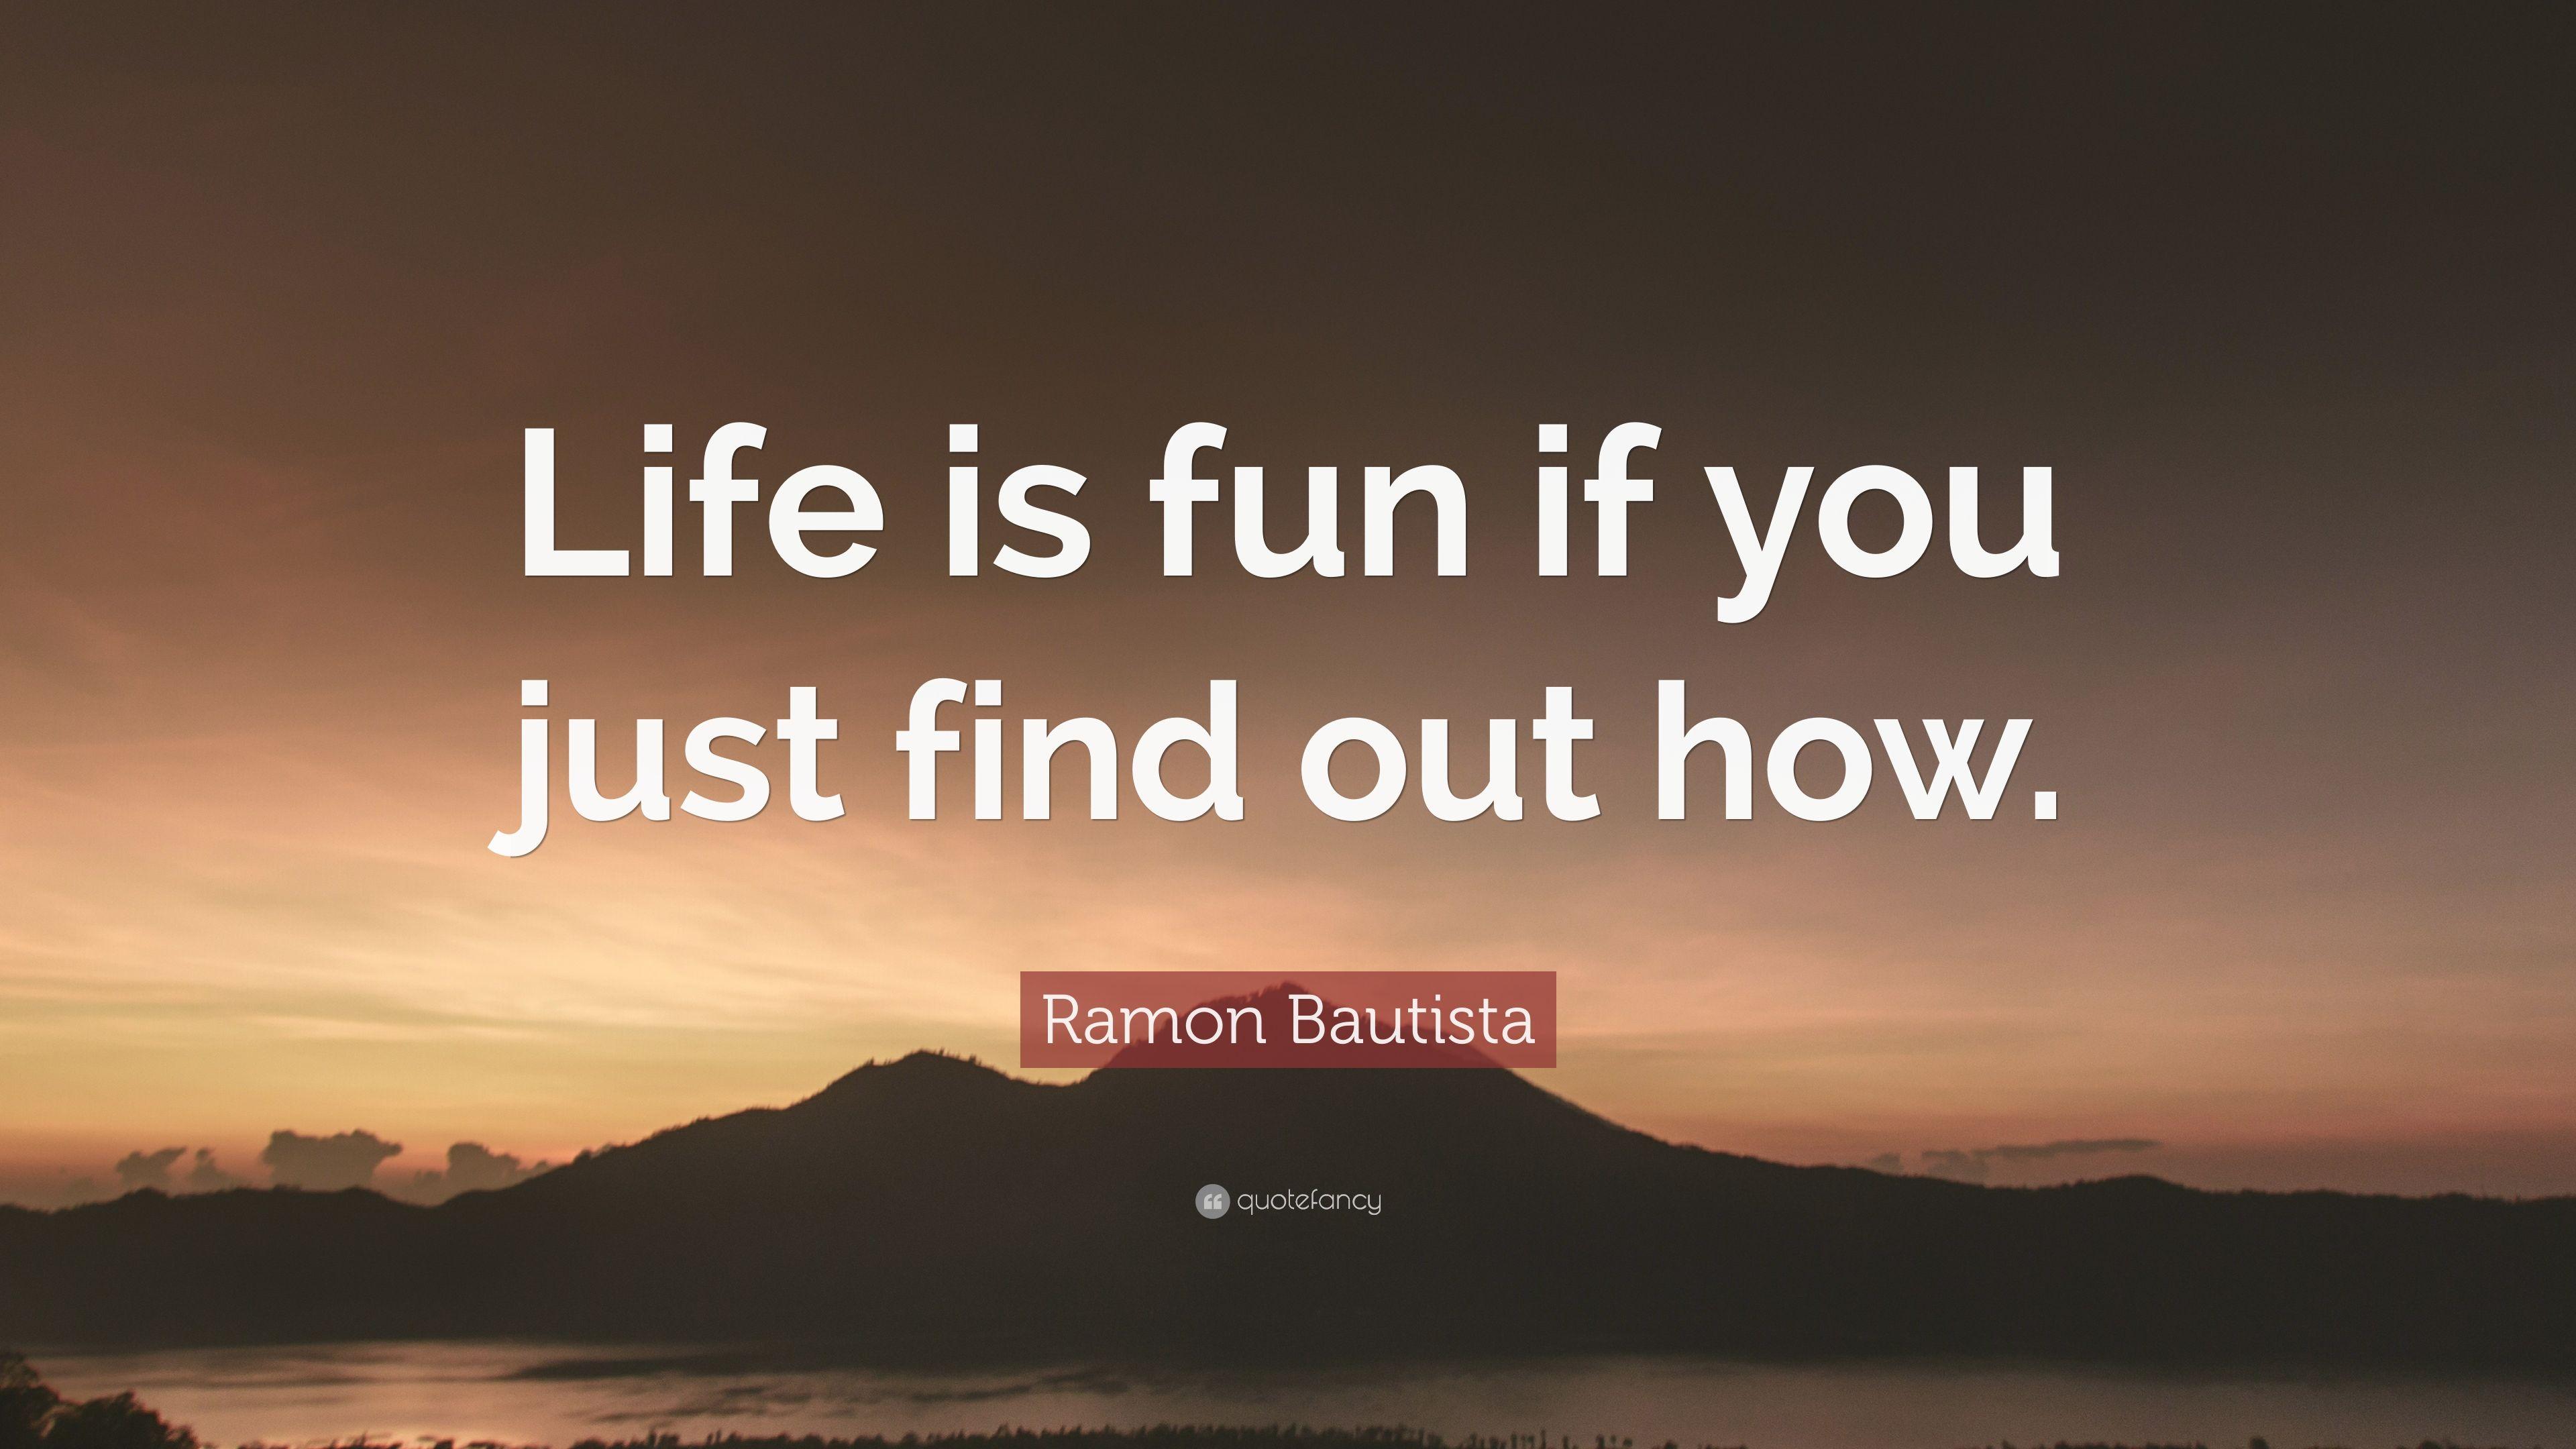 Ramon Bautista Quote: “Life is fun if you just find out how